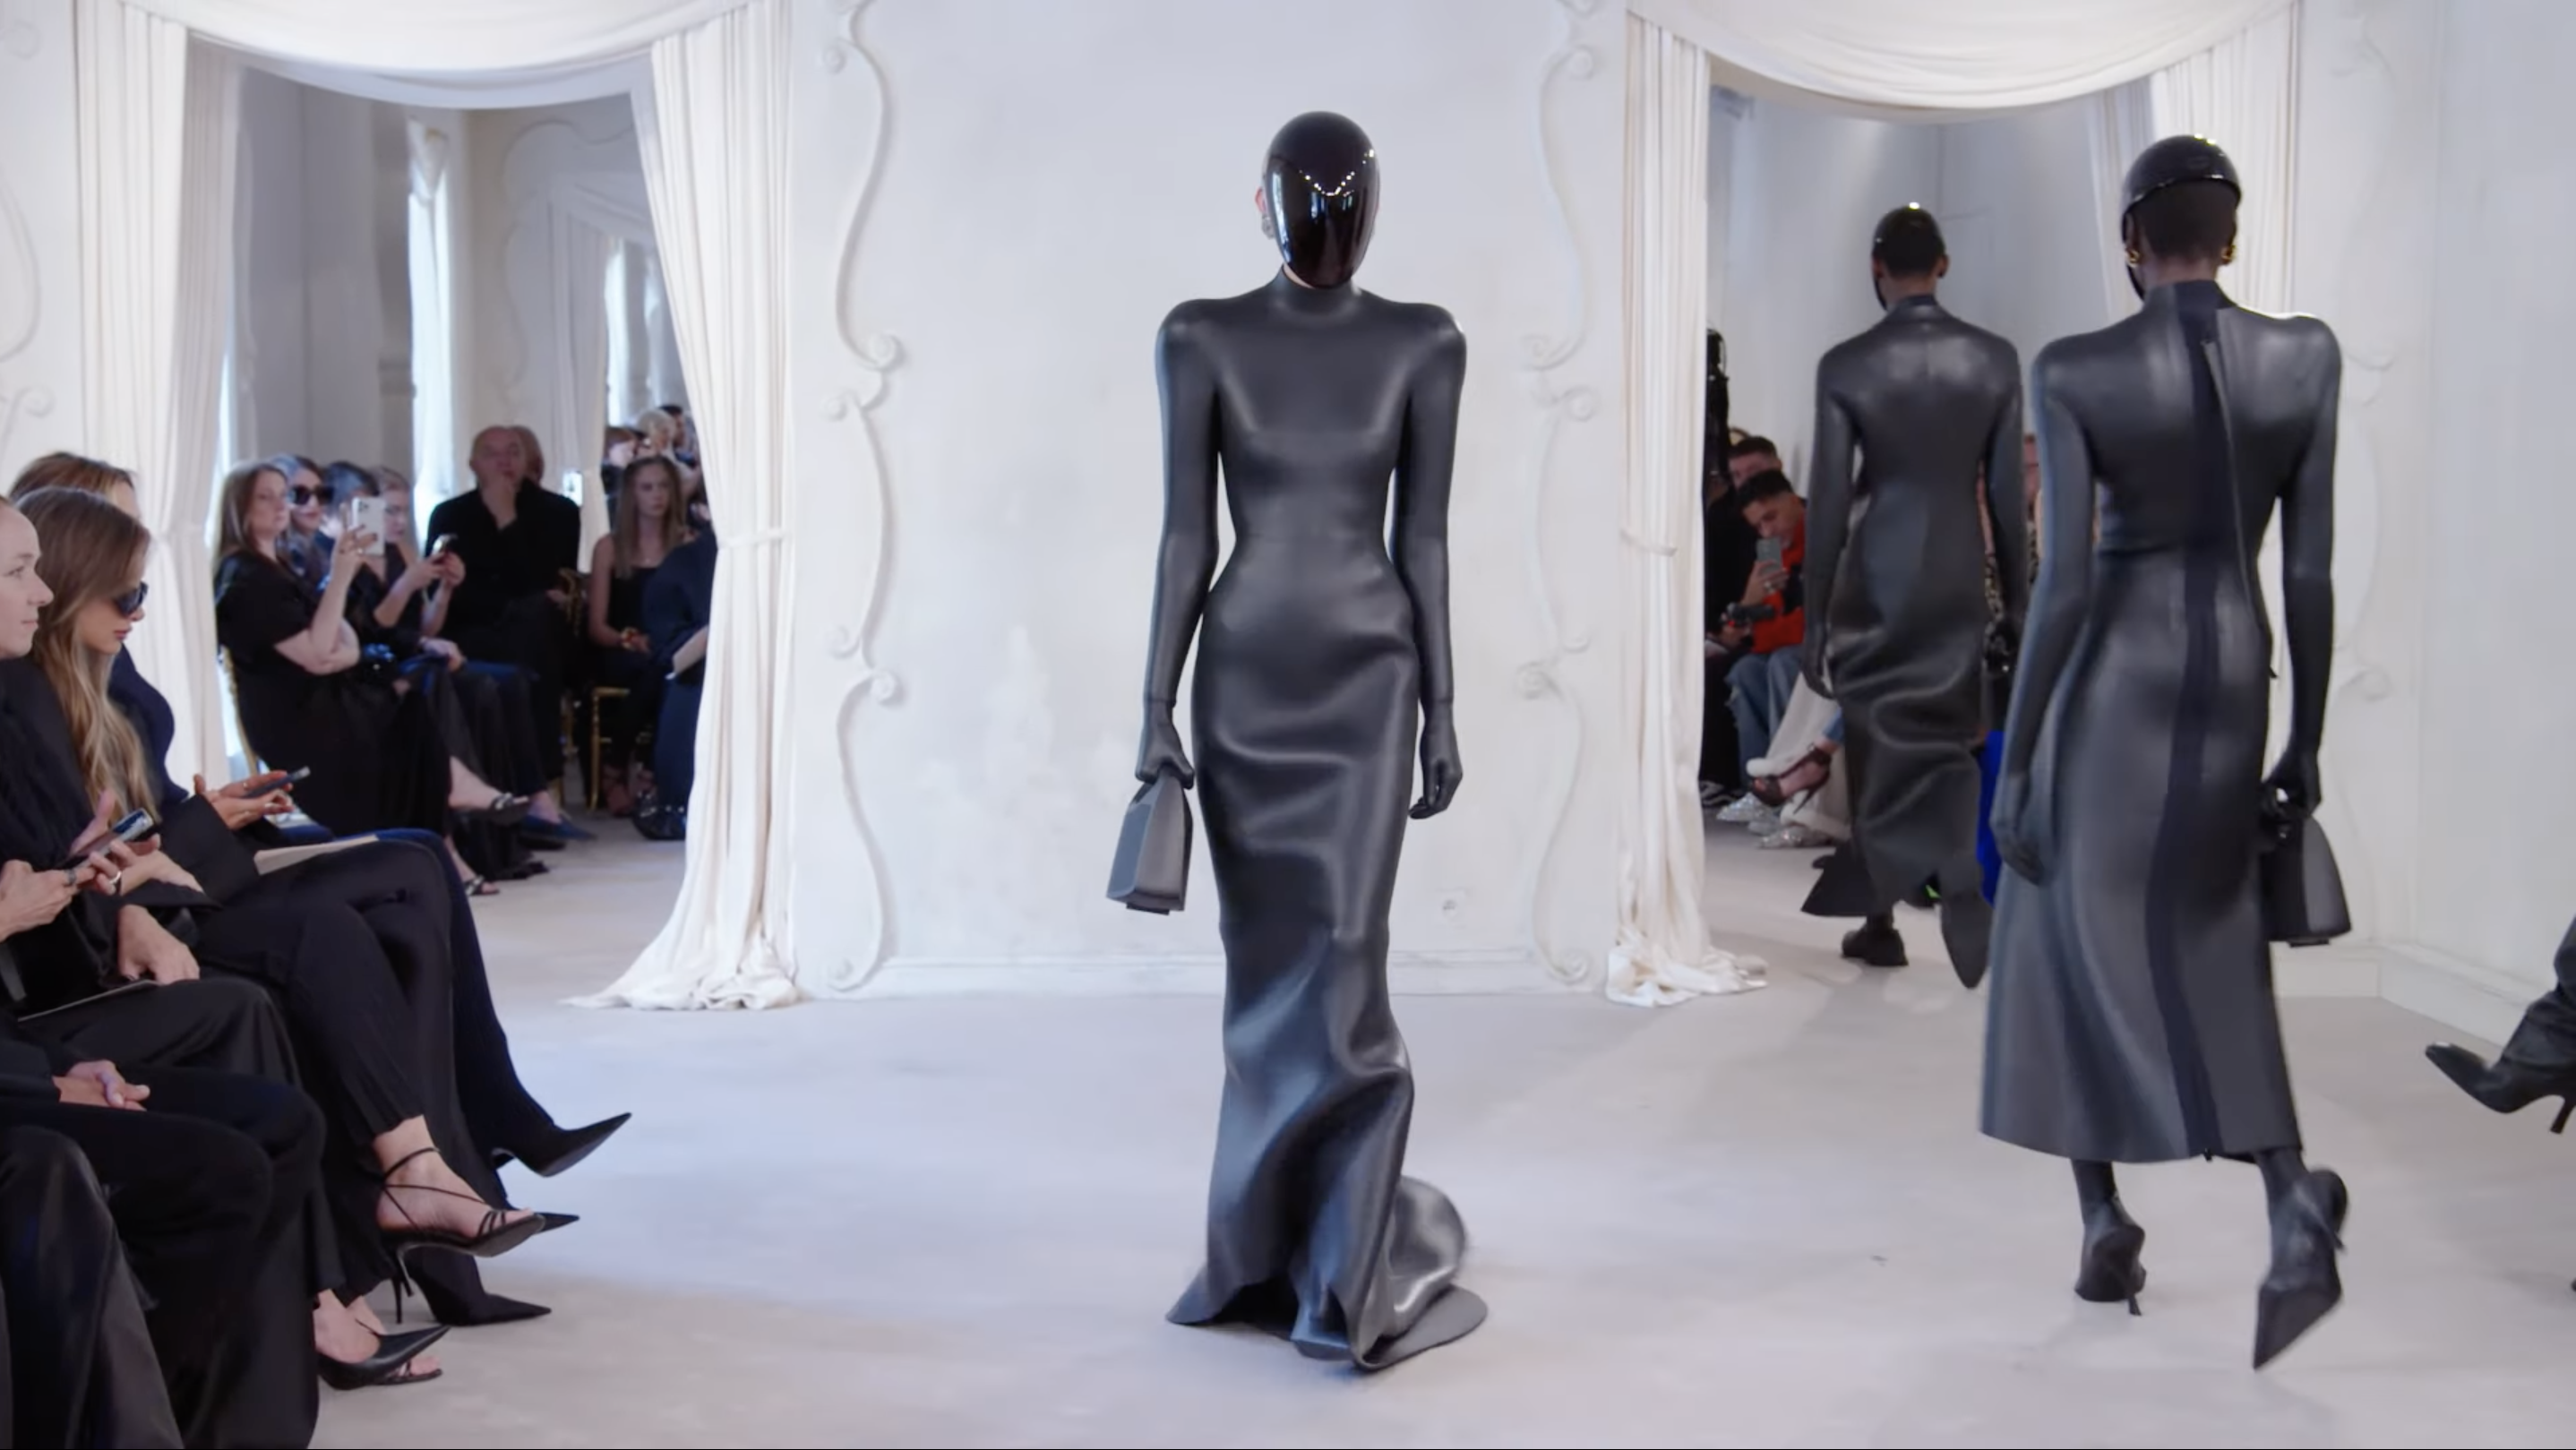 The Paris Review - Balenciaga, Light Verse, and Dancing on Command